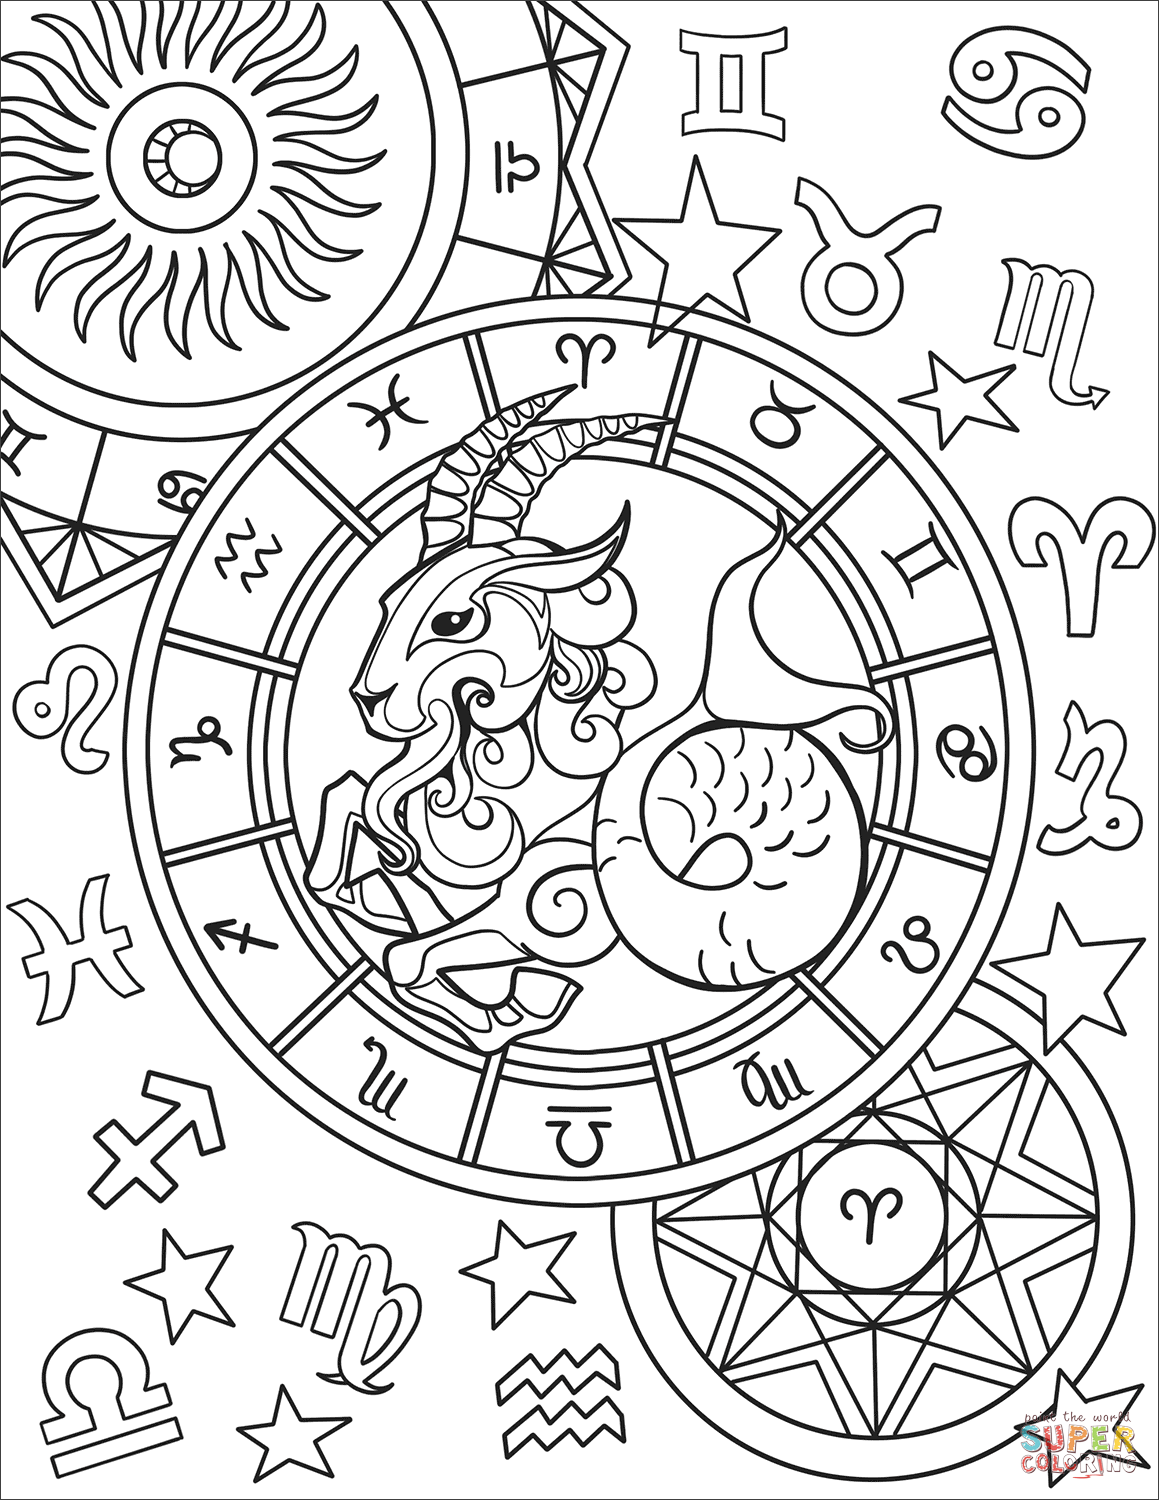 Capricorn Zodiac Sign Coloring Page   Free Printable Coloring ...